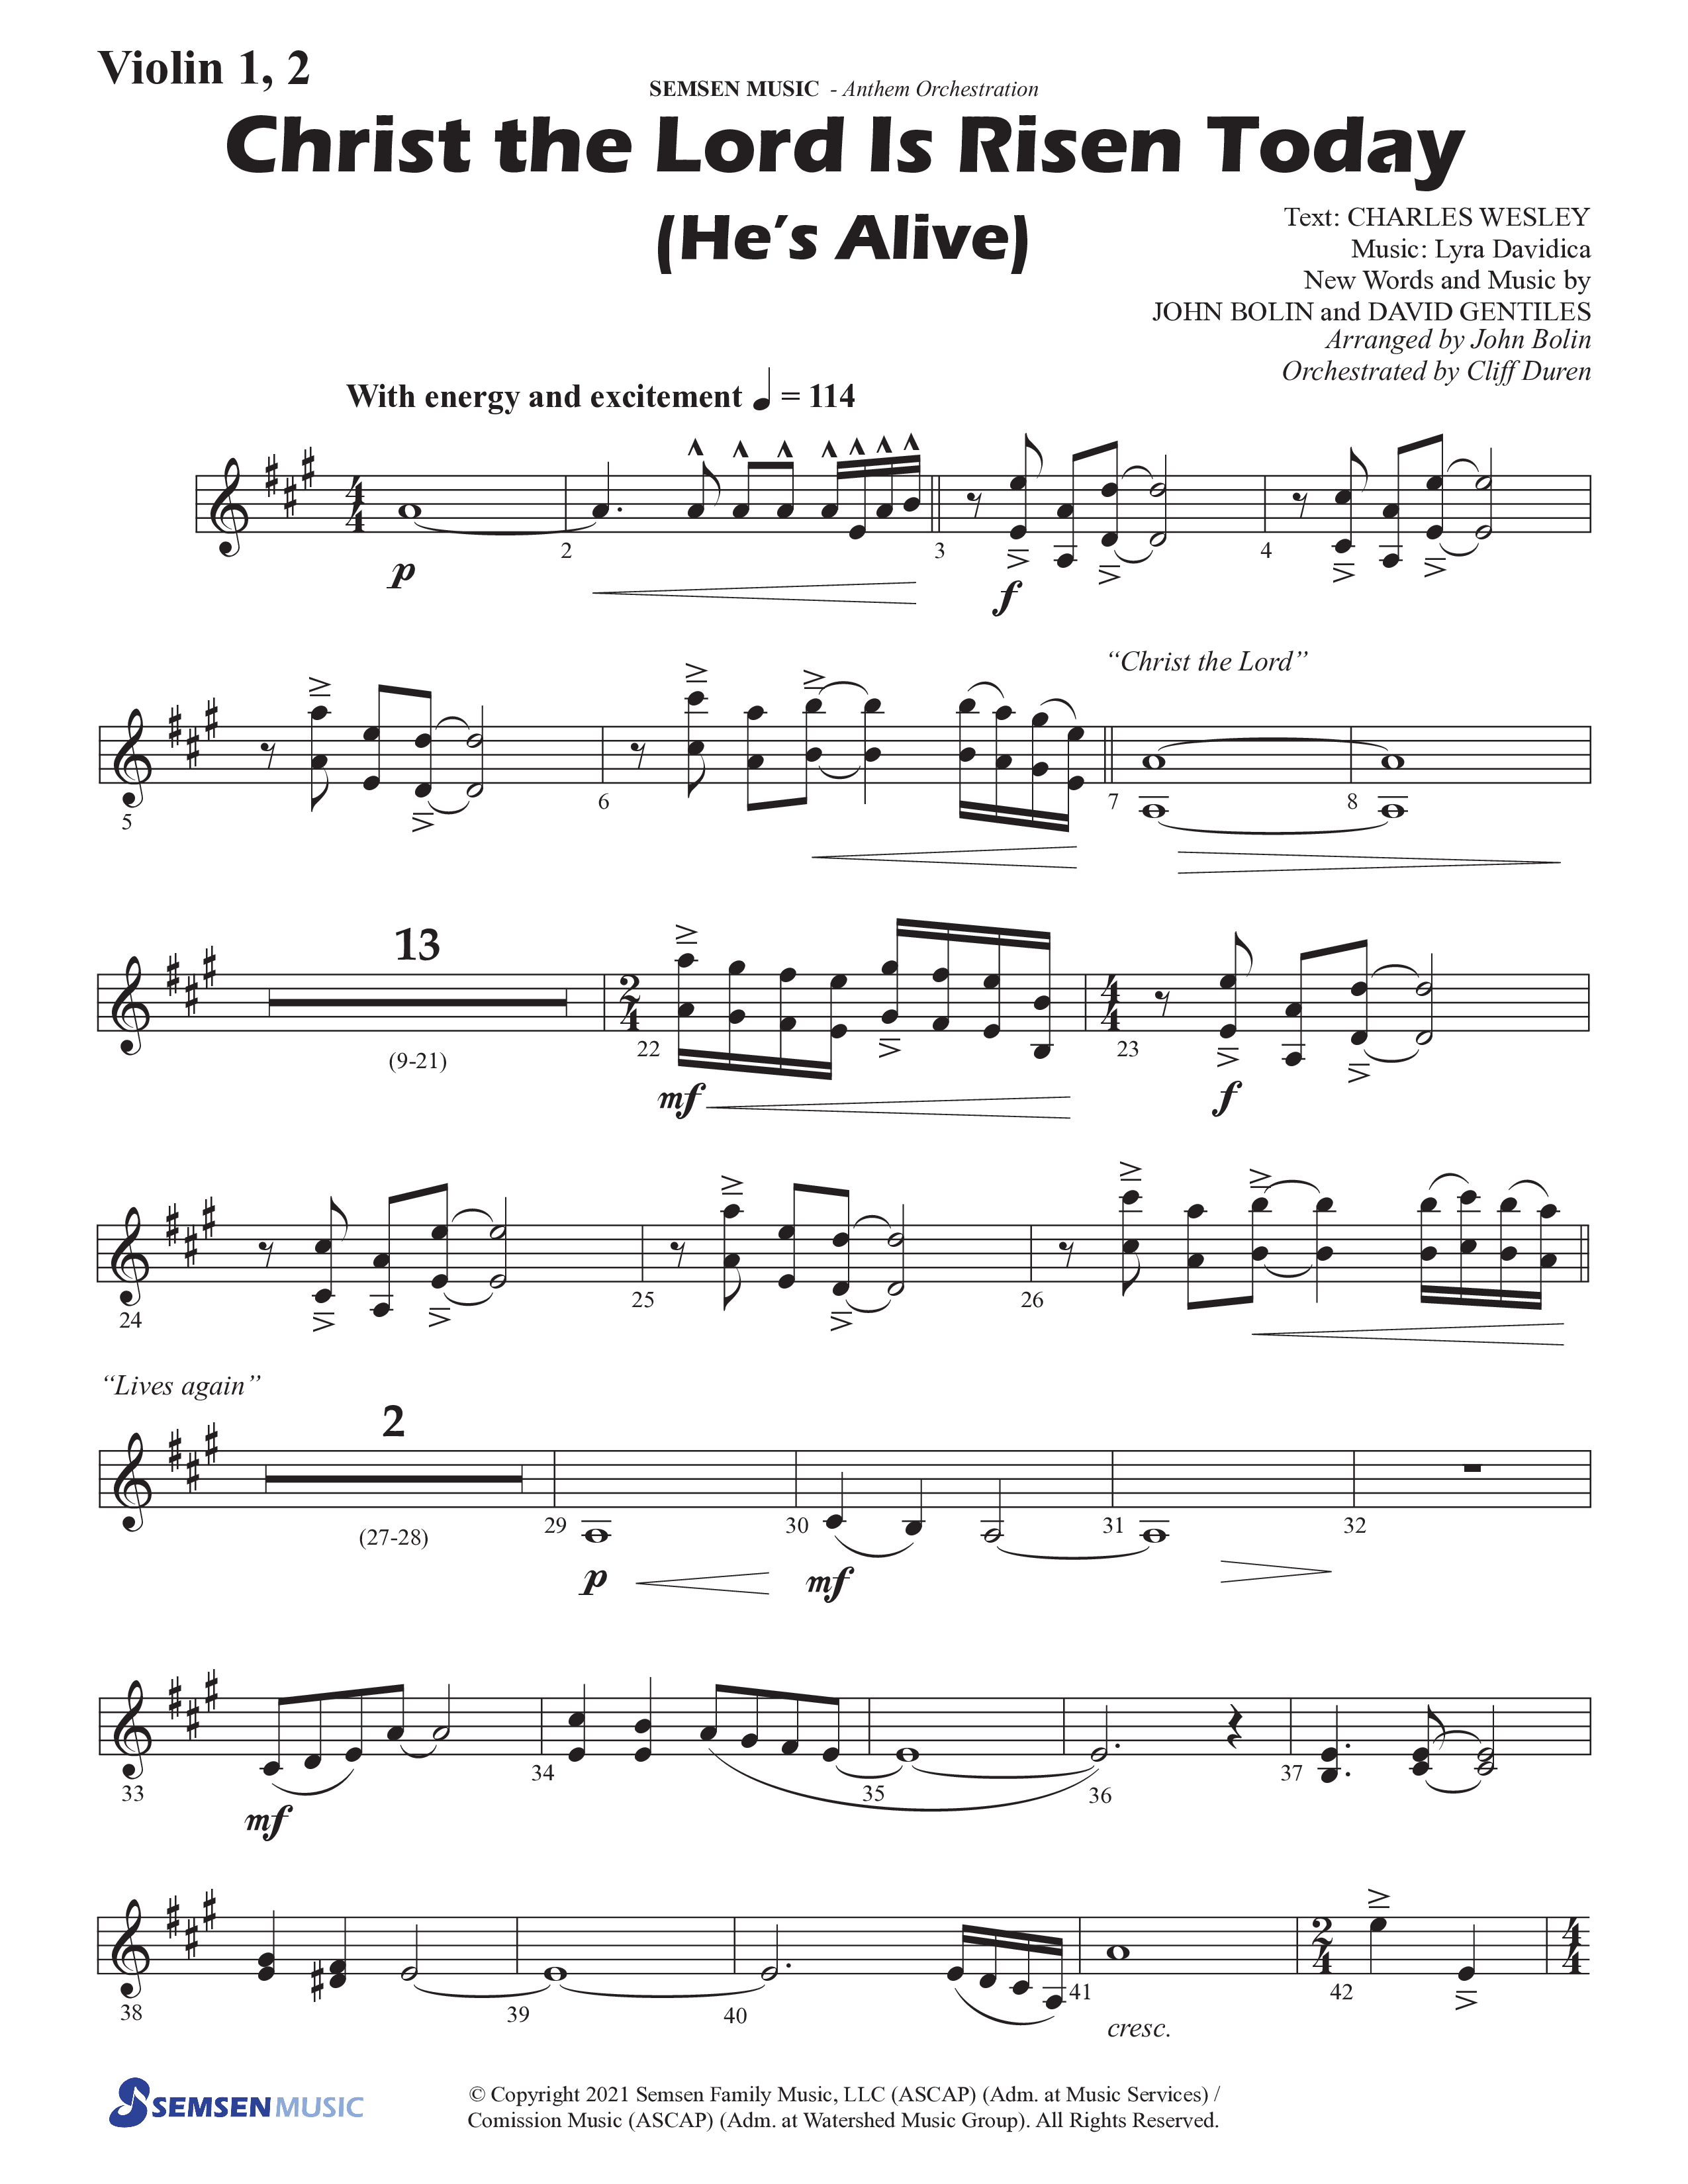 Christ The Lord Is Risen Today (He's Alive) (Choral Anthem SATB) Violin 1/2 (Semsen Music / Arr. John Bolin / Orch. Cliff Duren)